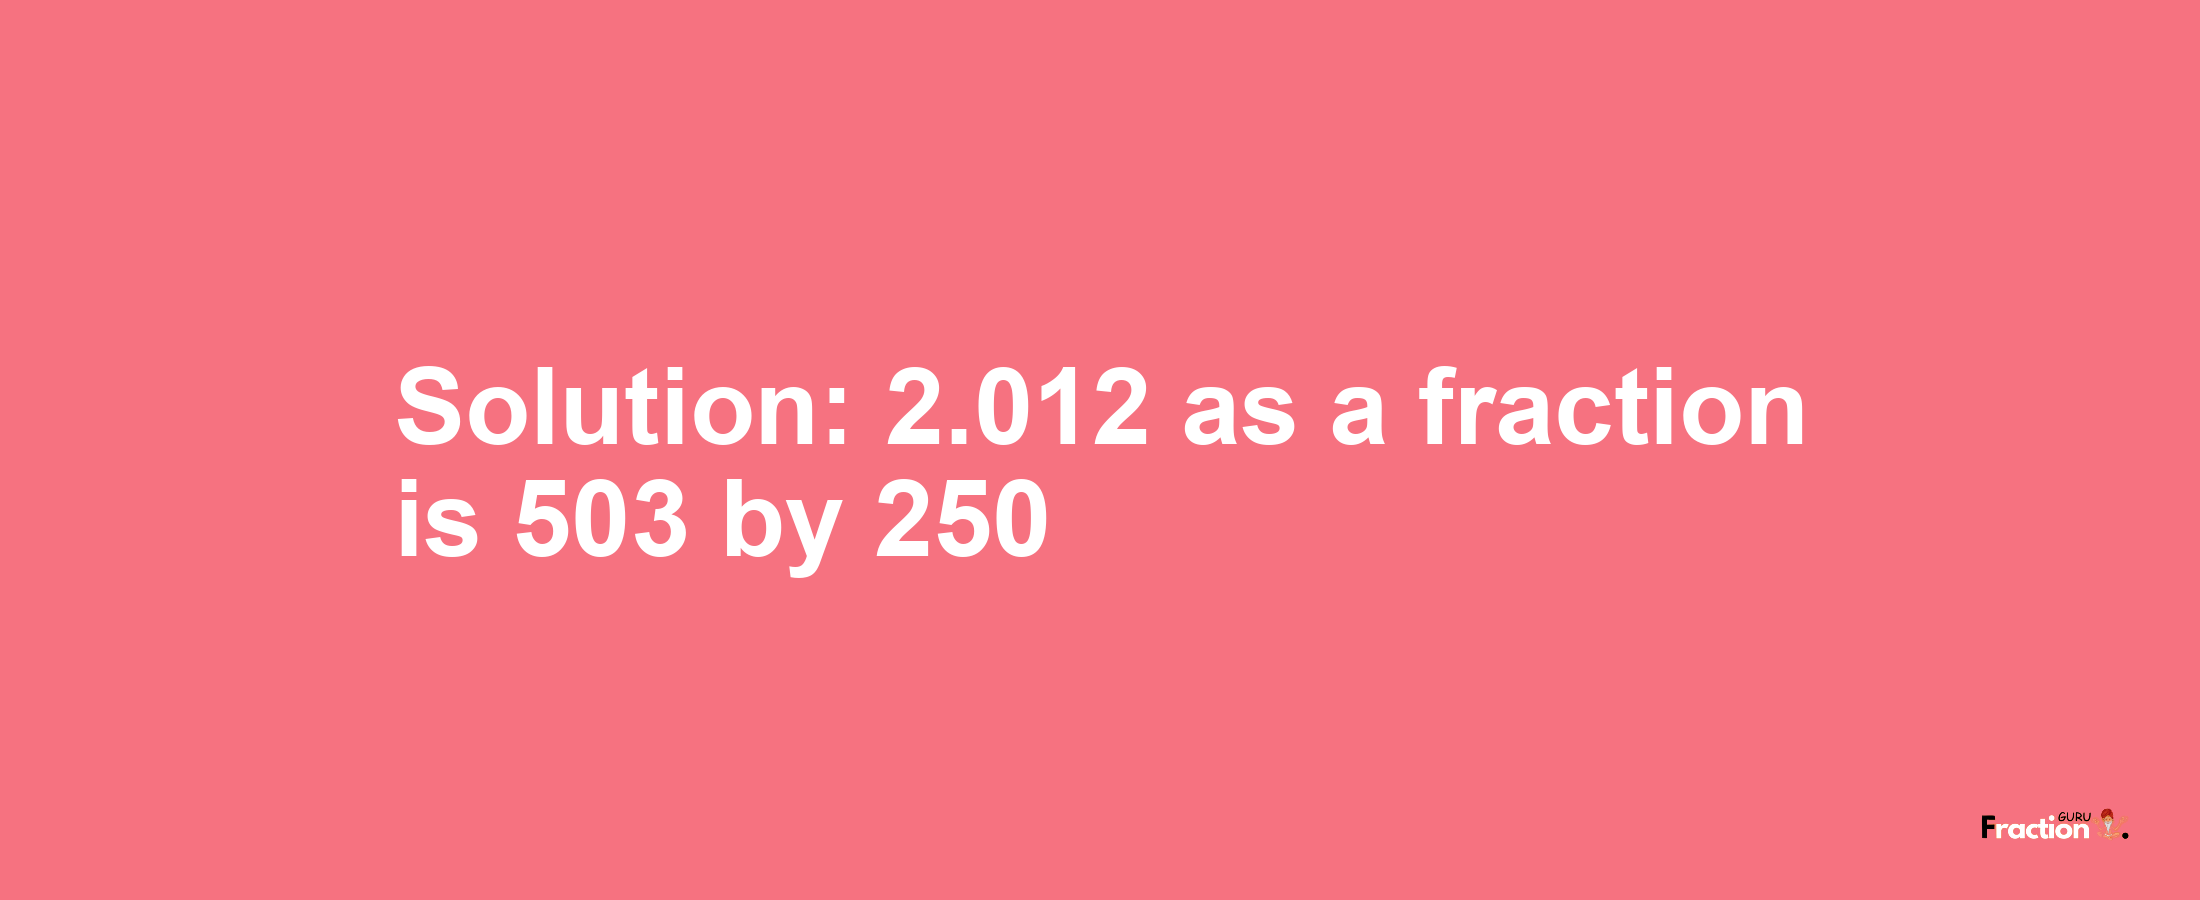 Solution:2.012 as a fraction is 503/250